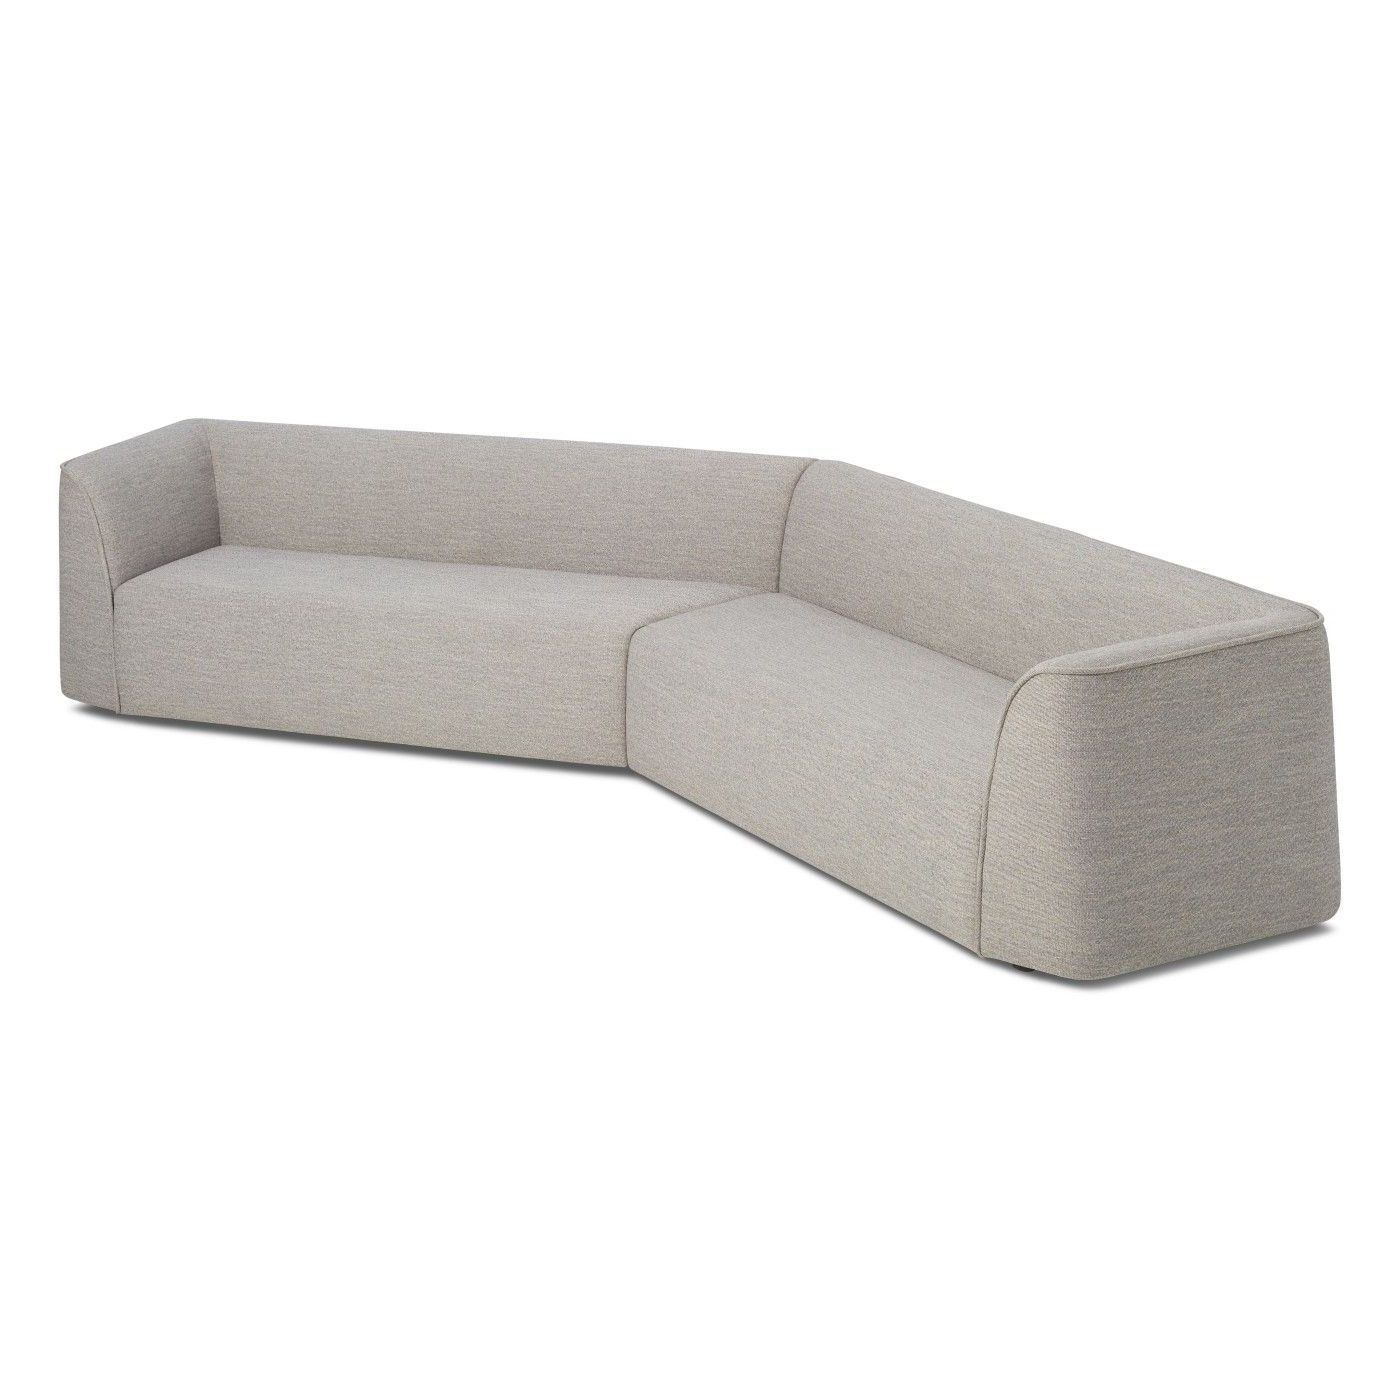 Sectional In Well Liked London Optical Reversible Sofa Chaise Sectionals (View 12 of 20)